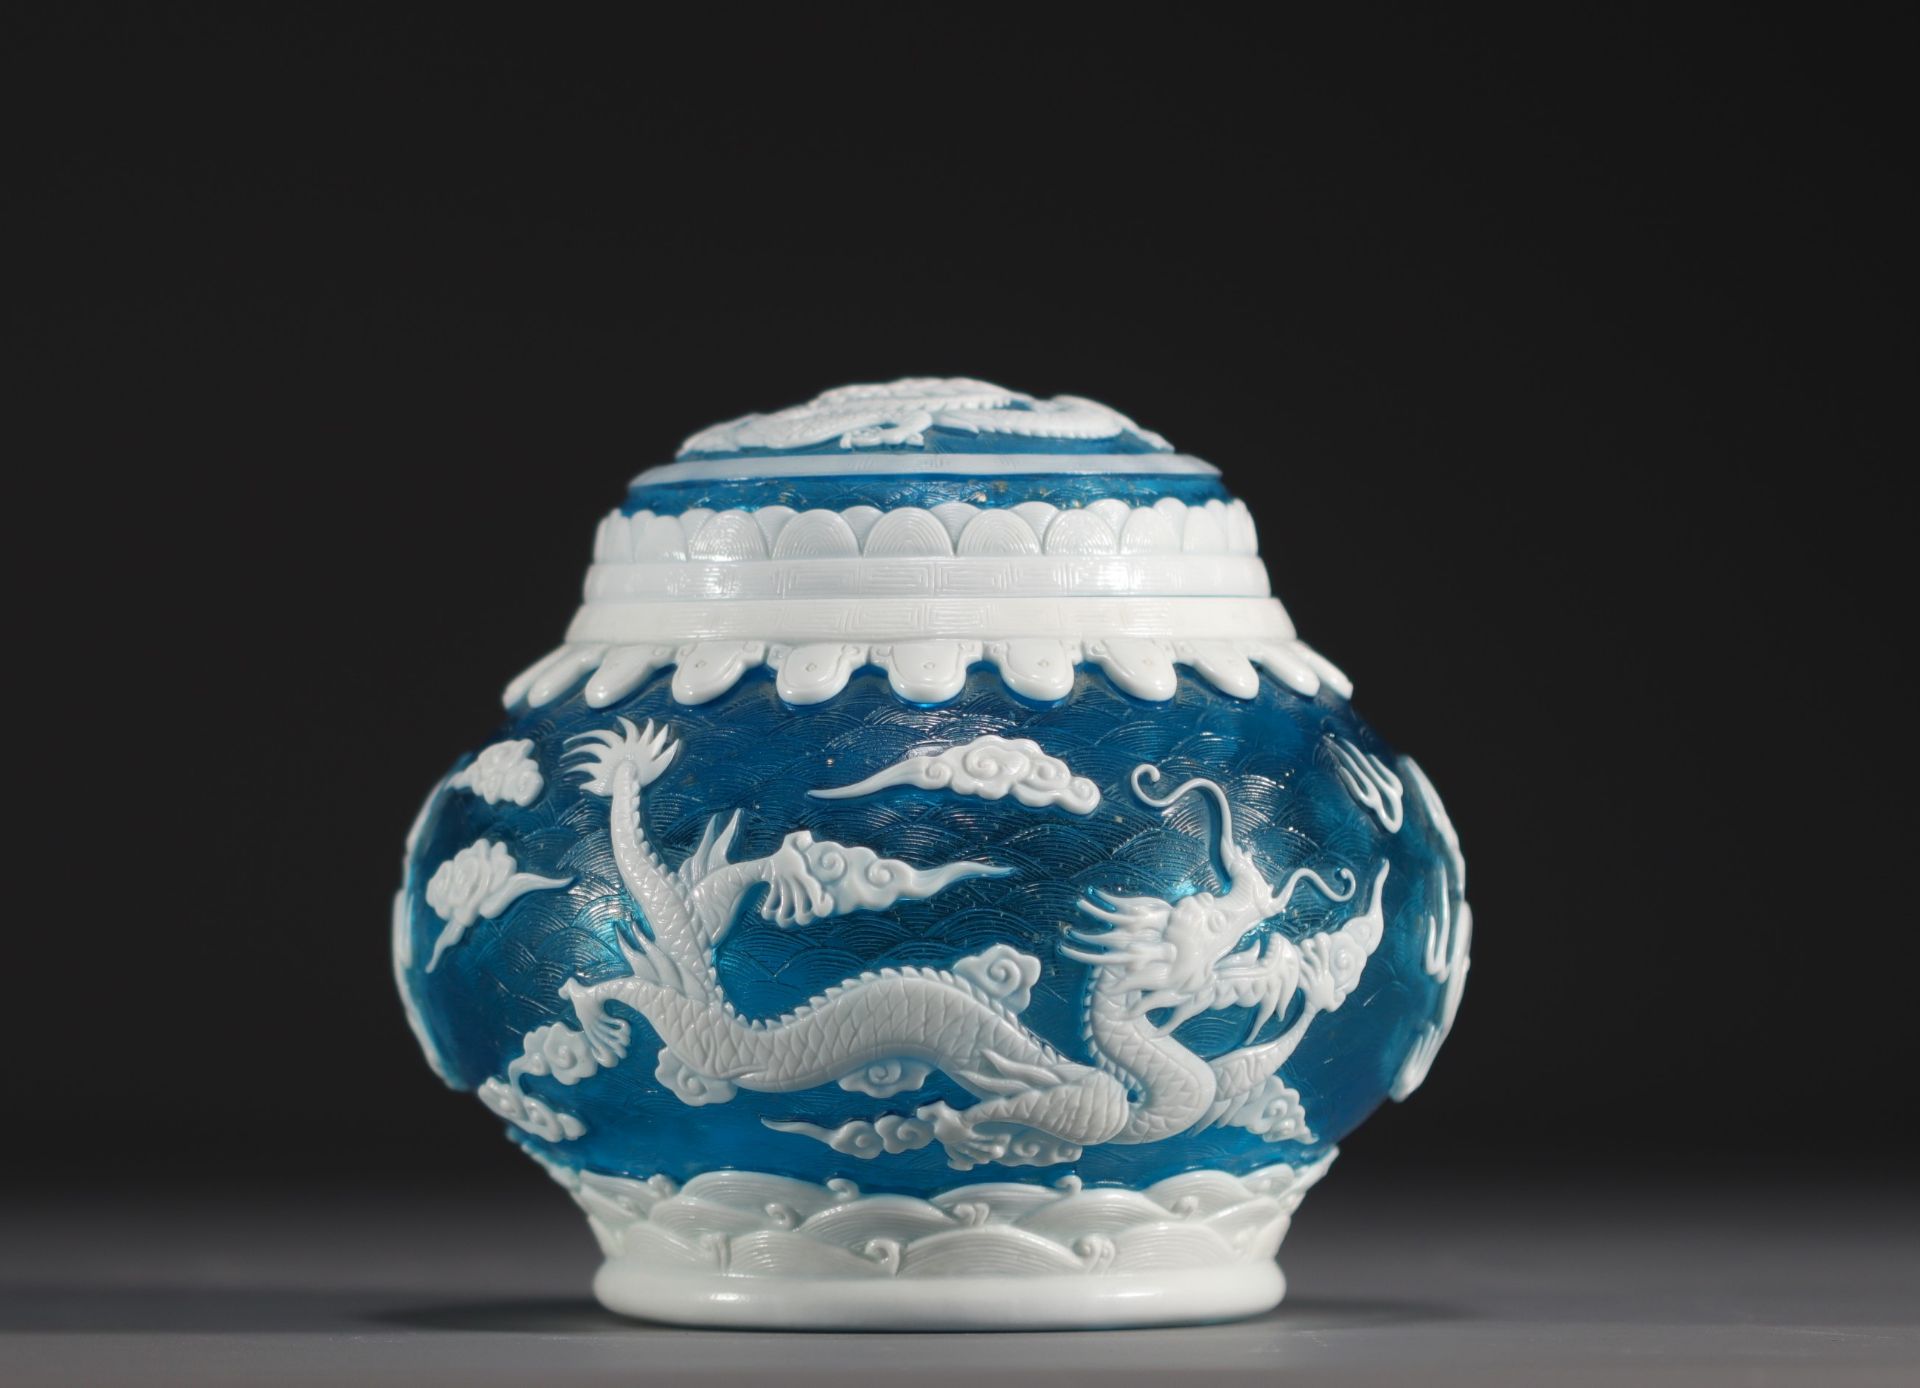 China - Peking glassware covered pot decorated with dragons and gold flakes.